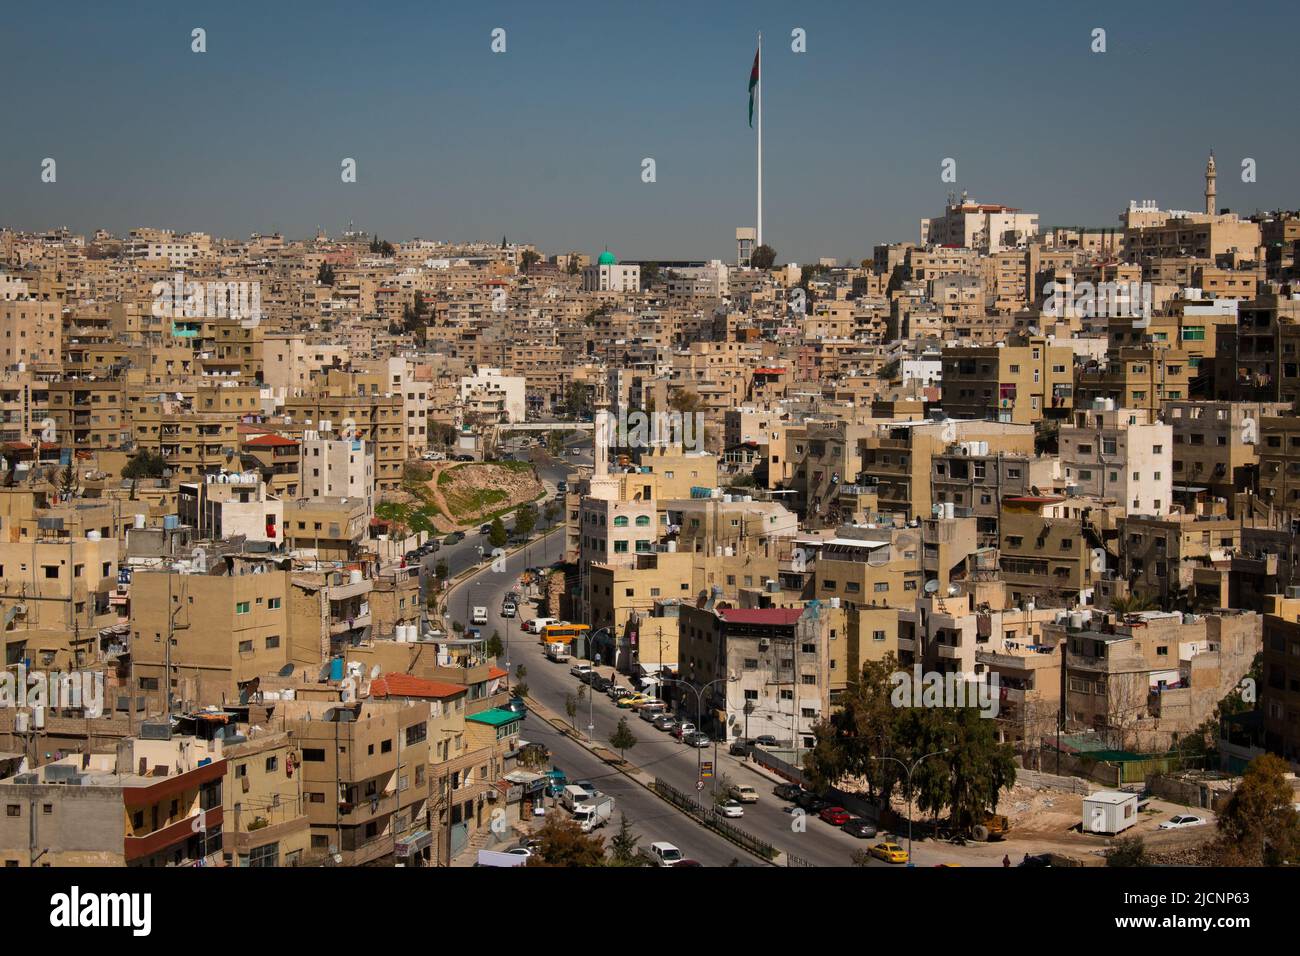 Amman, Jordan - March the 3rd 2018: An aerial view of the empty streets during a hot day from Amman Citadel Hill Stock Photo